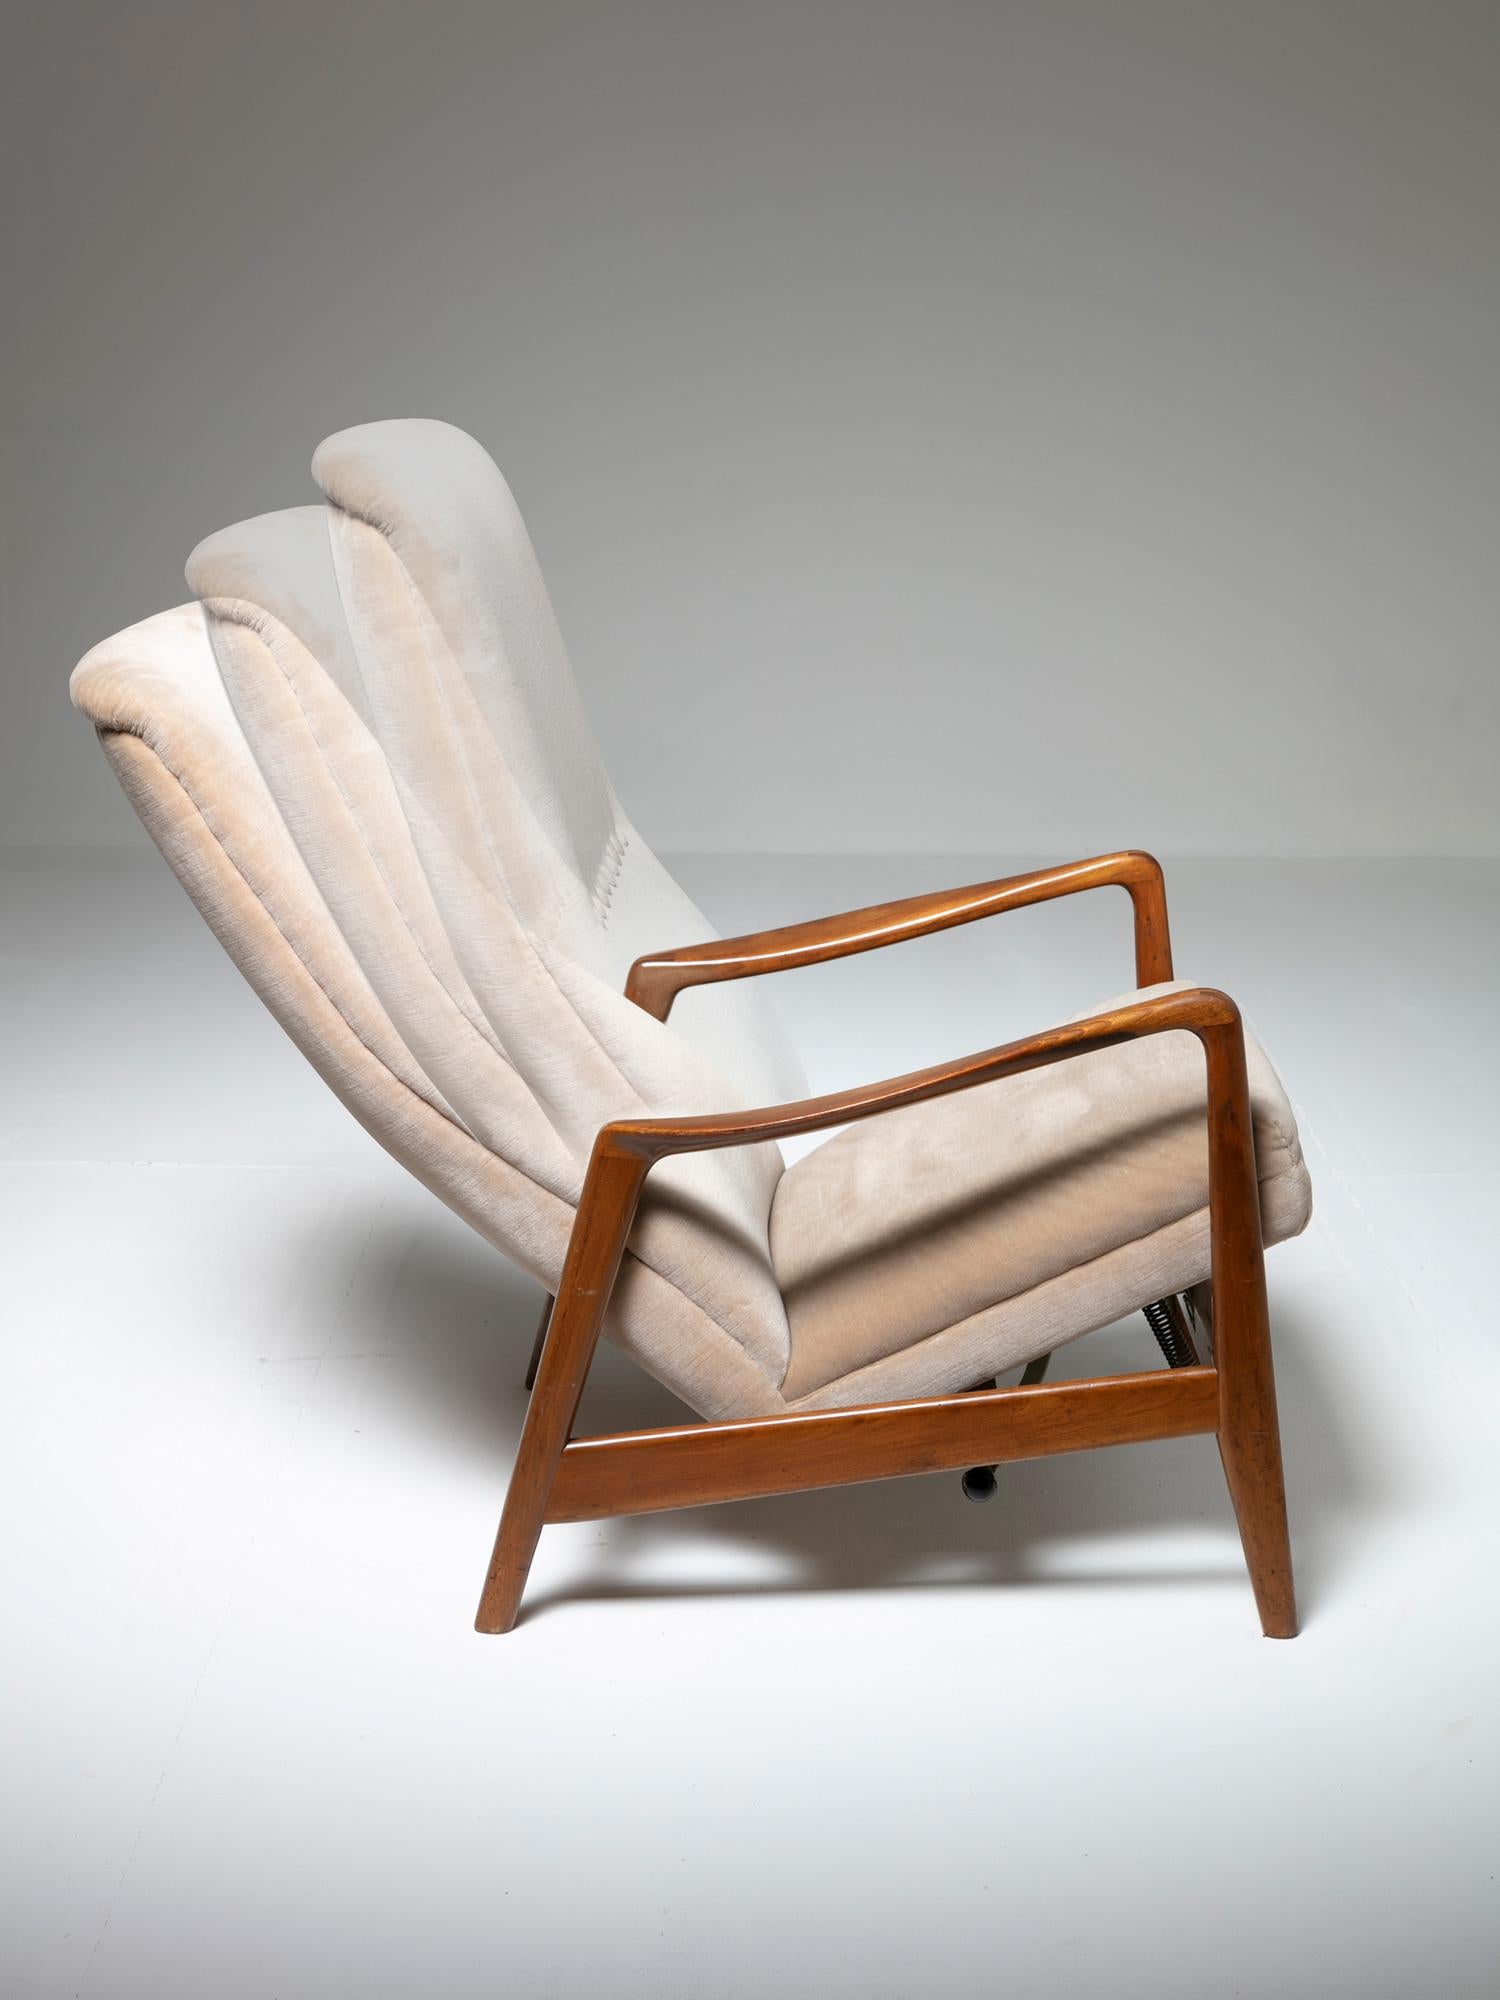 Reclining chair model 829 by Arnestad Bruk for Cassina.
Walnut frame, original fabric and mechanical system allowing 8 different positions.
Chair usually wrongly attributed to Gio Ponti.